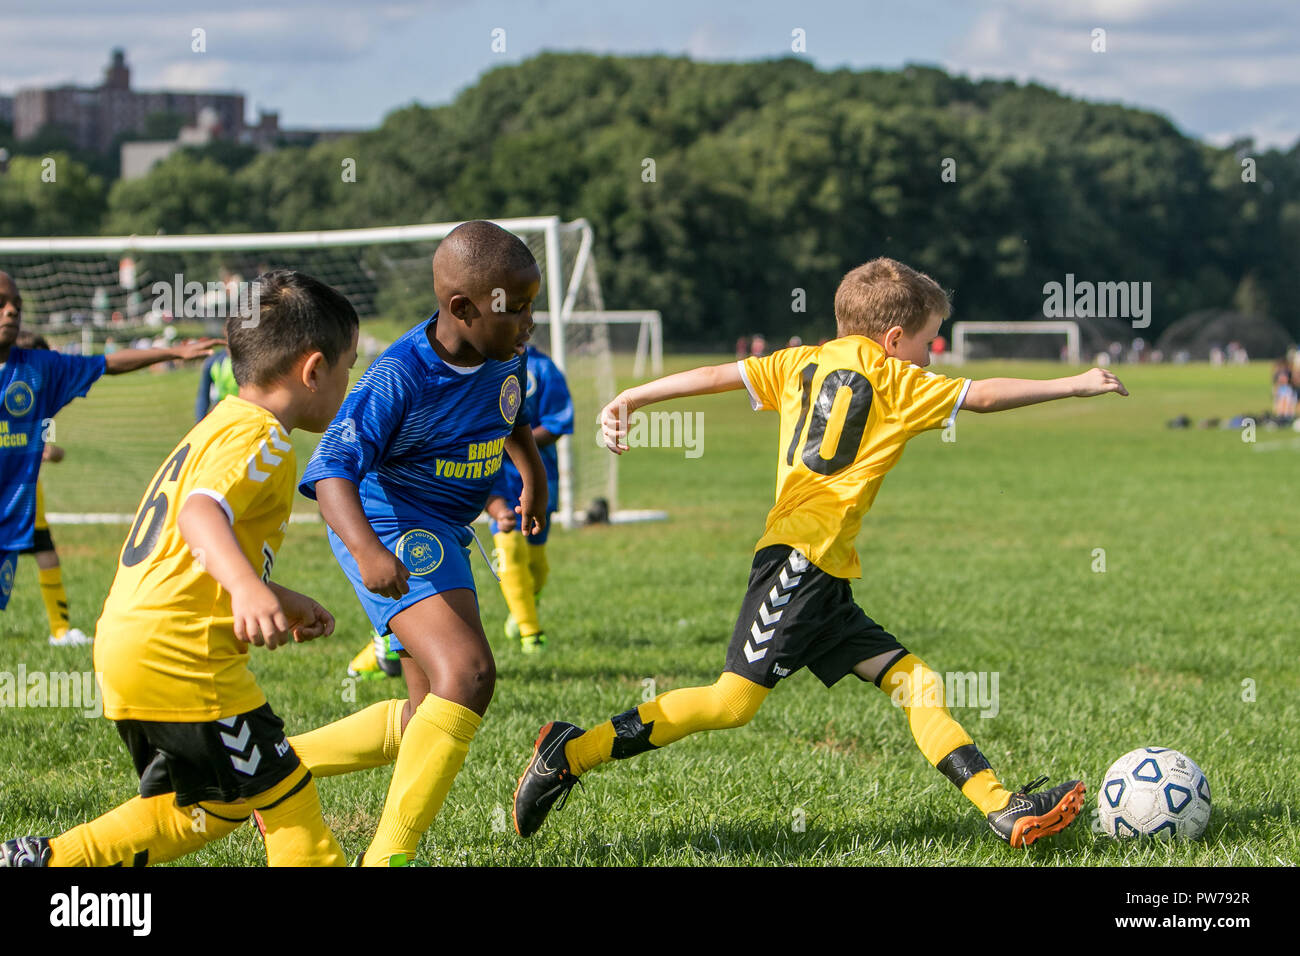 New York , September 29, 2018: 7 and 8 year old boys are playing a league soccer game. Stock Photo